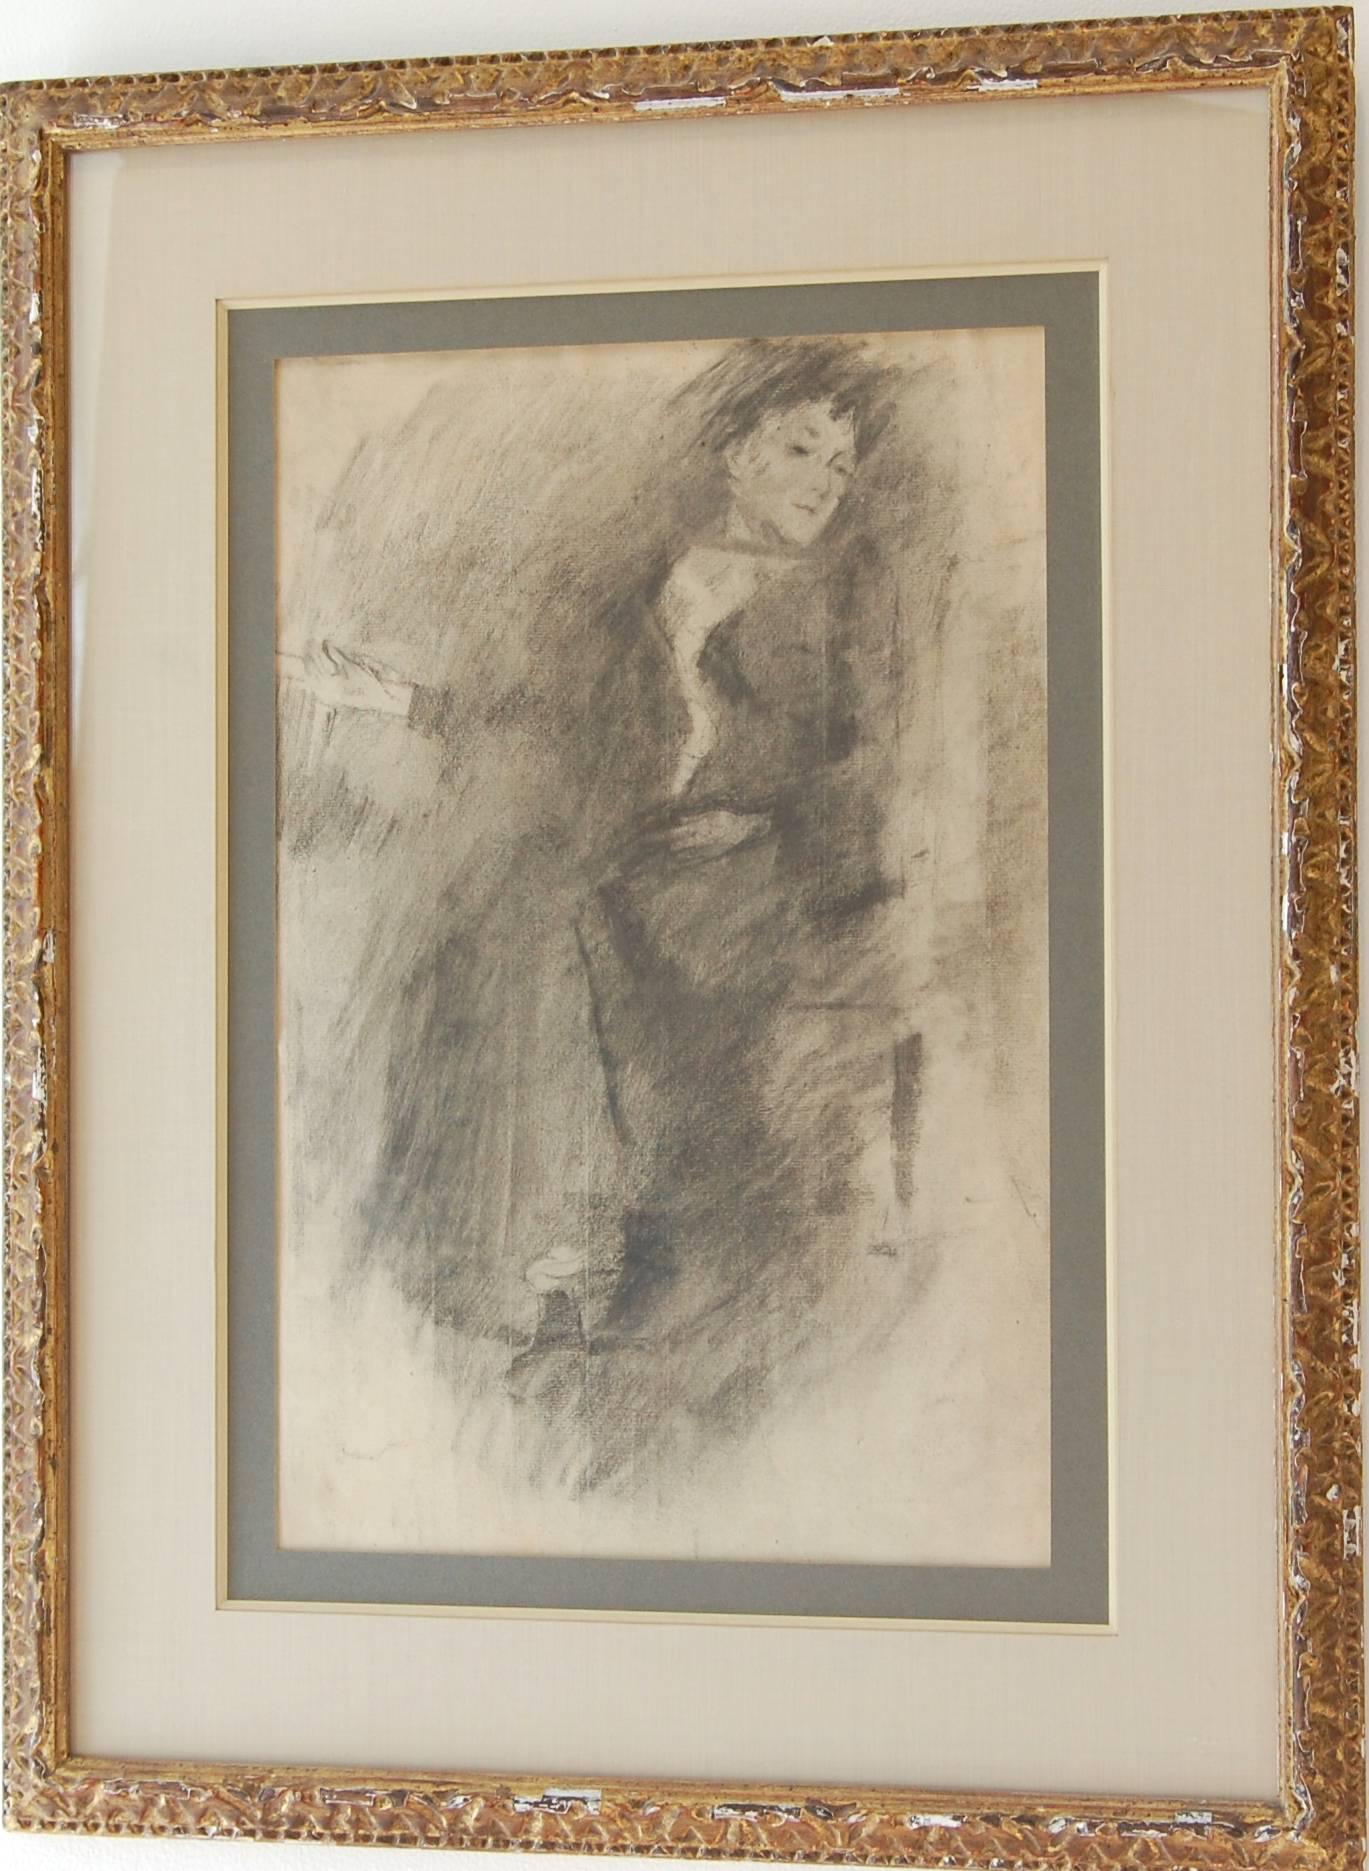 Unknown Figurative Art - Early 20th Century French School Pencil Drawing of a Woman